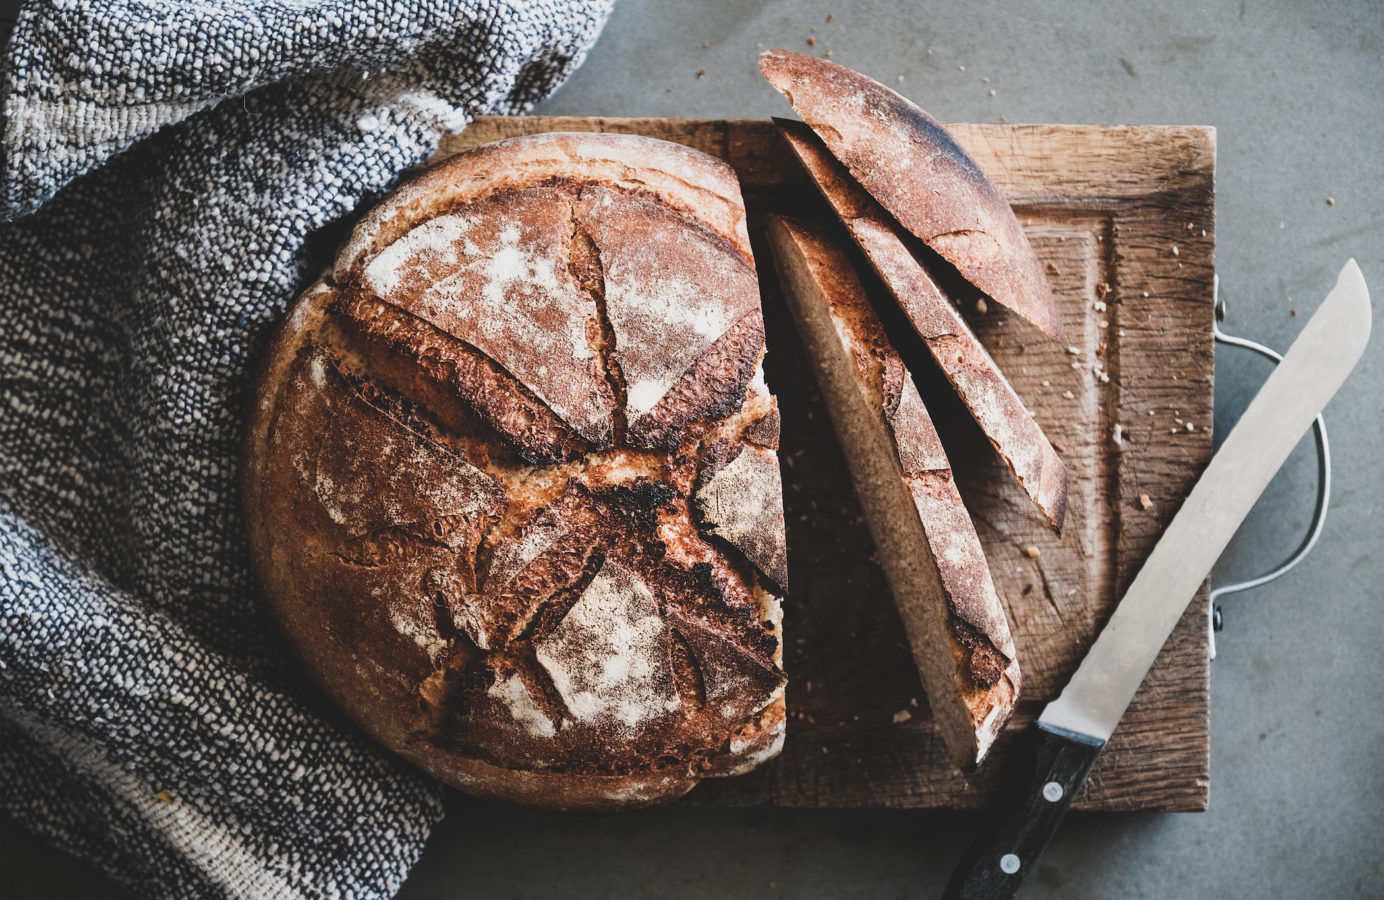 The best bakeries for crusty, chewy sourdough loaves